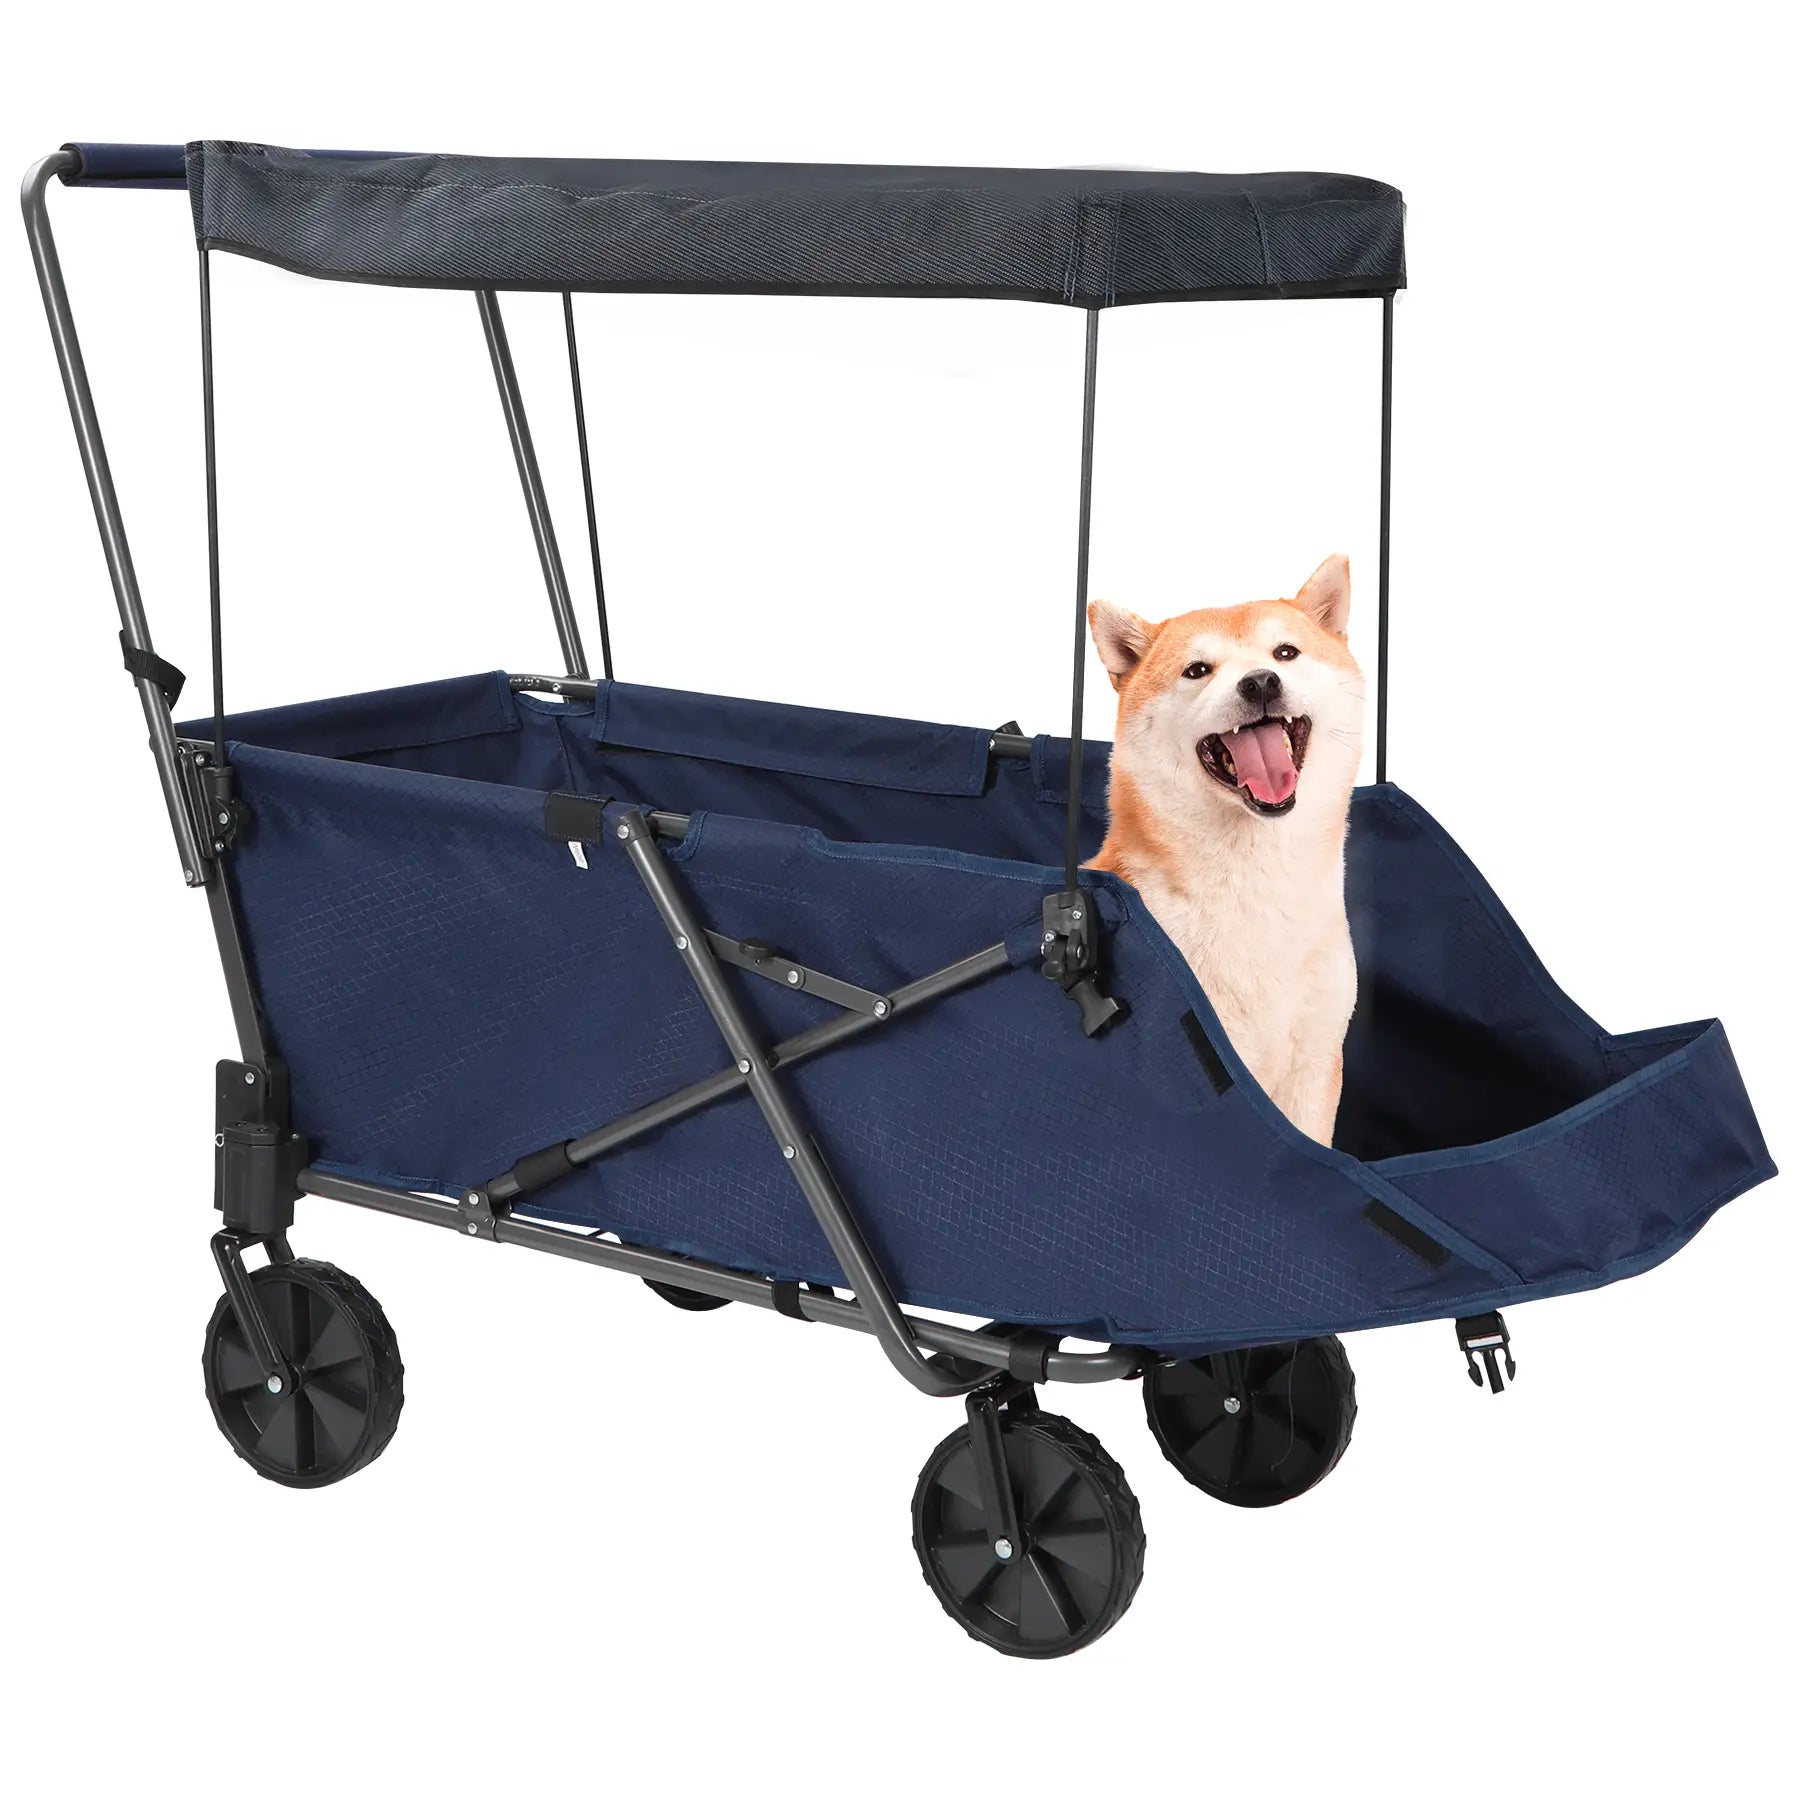 REDCAMP Folding Dog Wagon with Removable Canopy